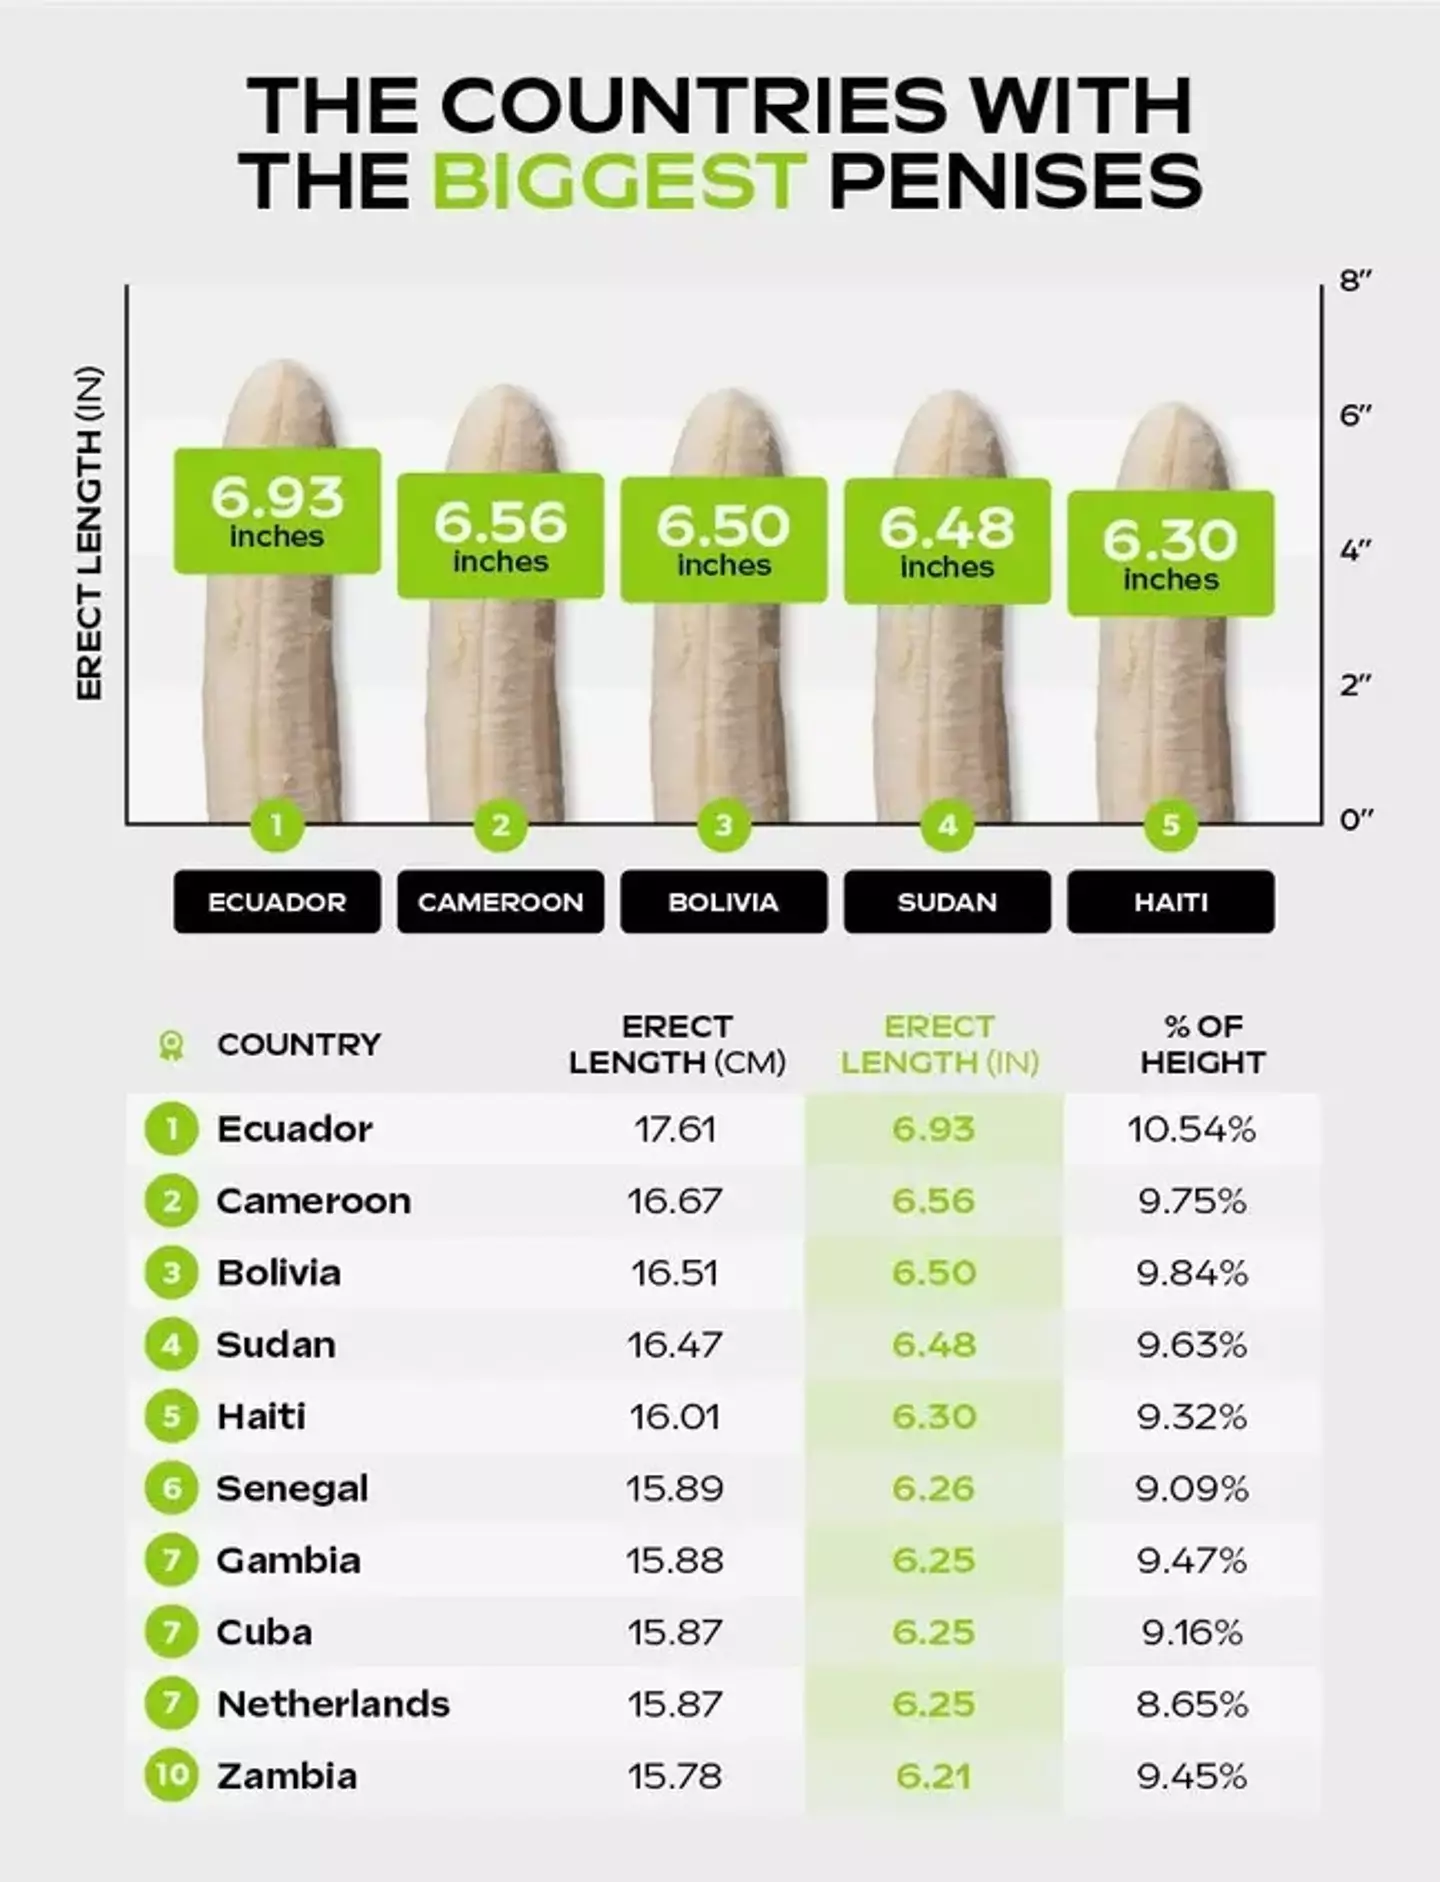 Country with the biggest average penis size in the world has been